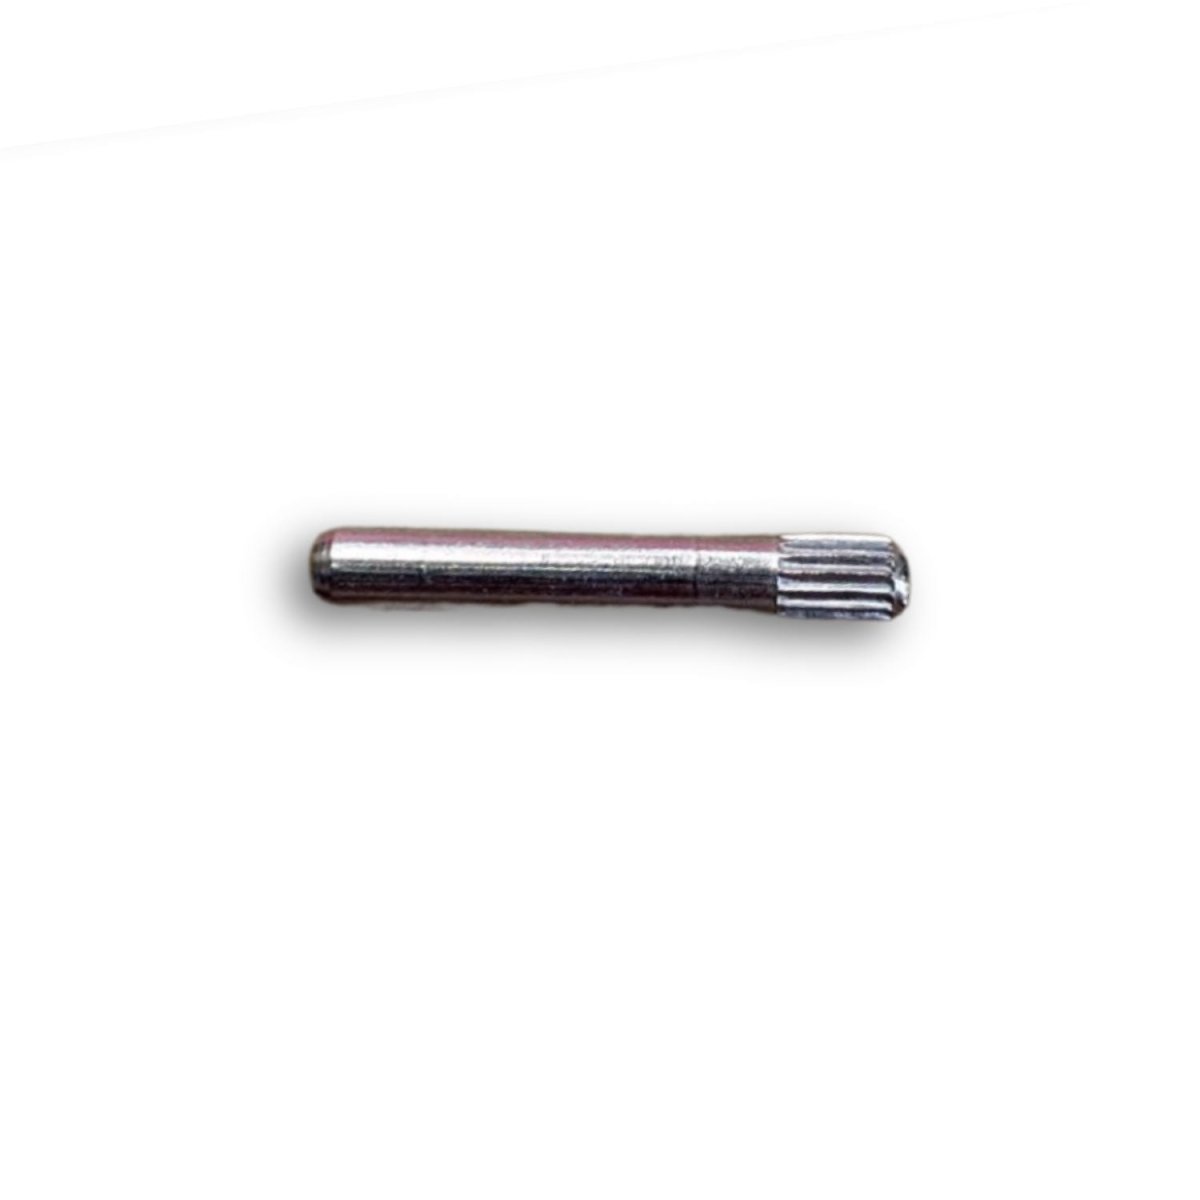 ION 10 & 12 Toe Mode Lever Pin - Parts - G3 Store [CAD]